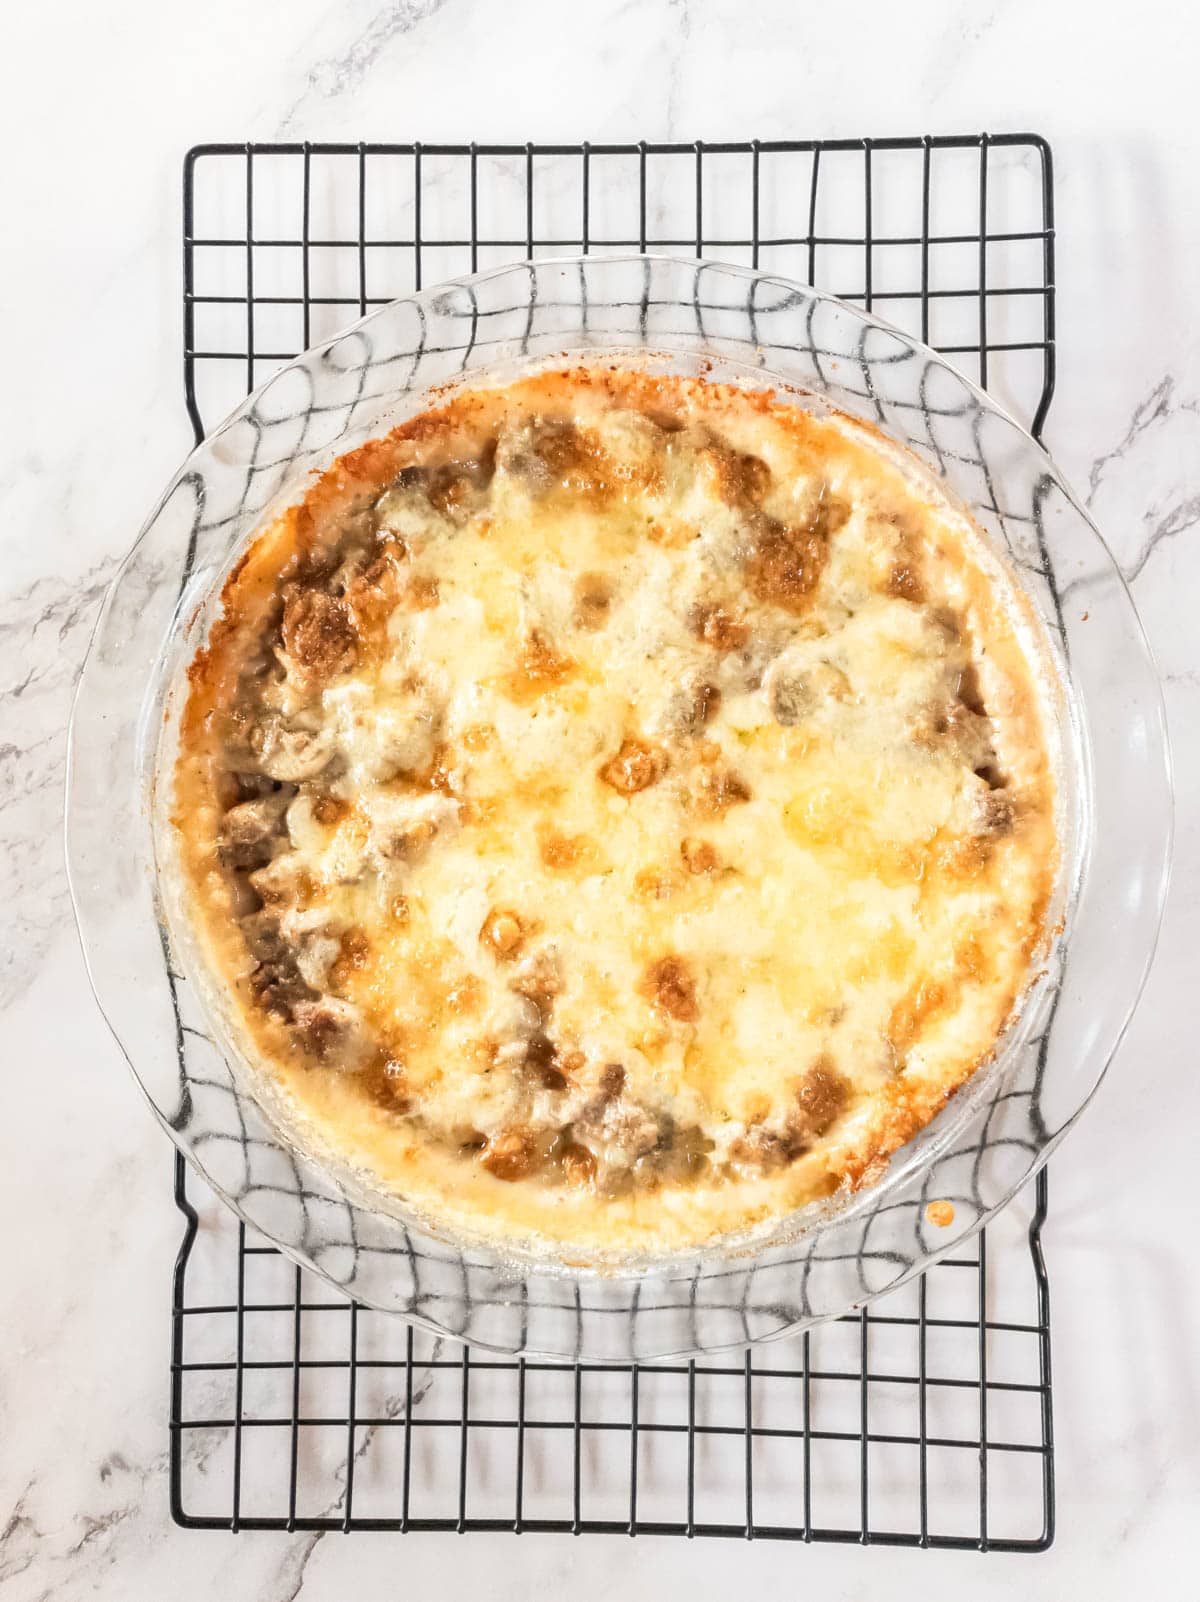 Baked cheesy low-carb meat pie cooling on a wire rack.